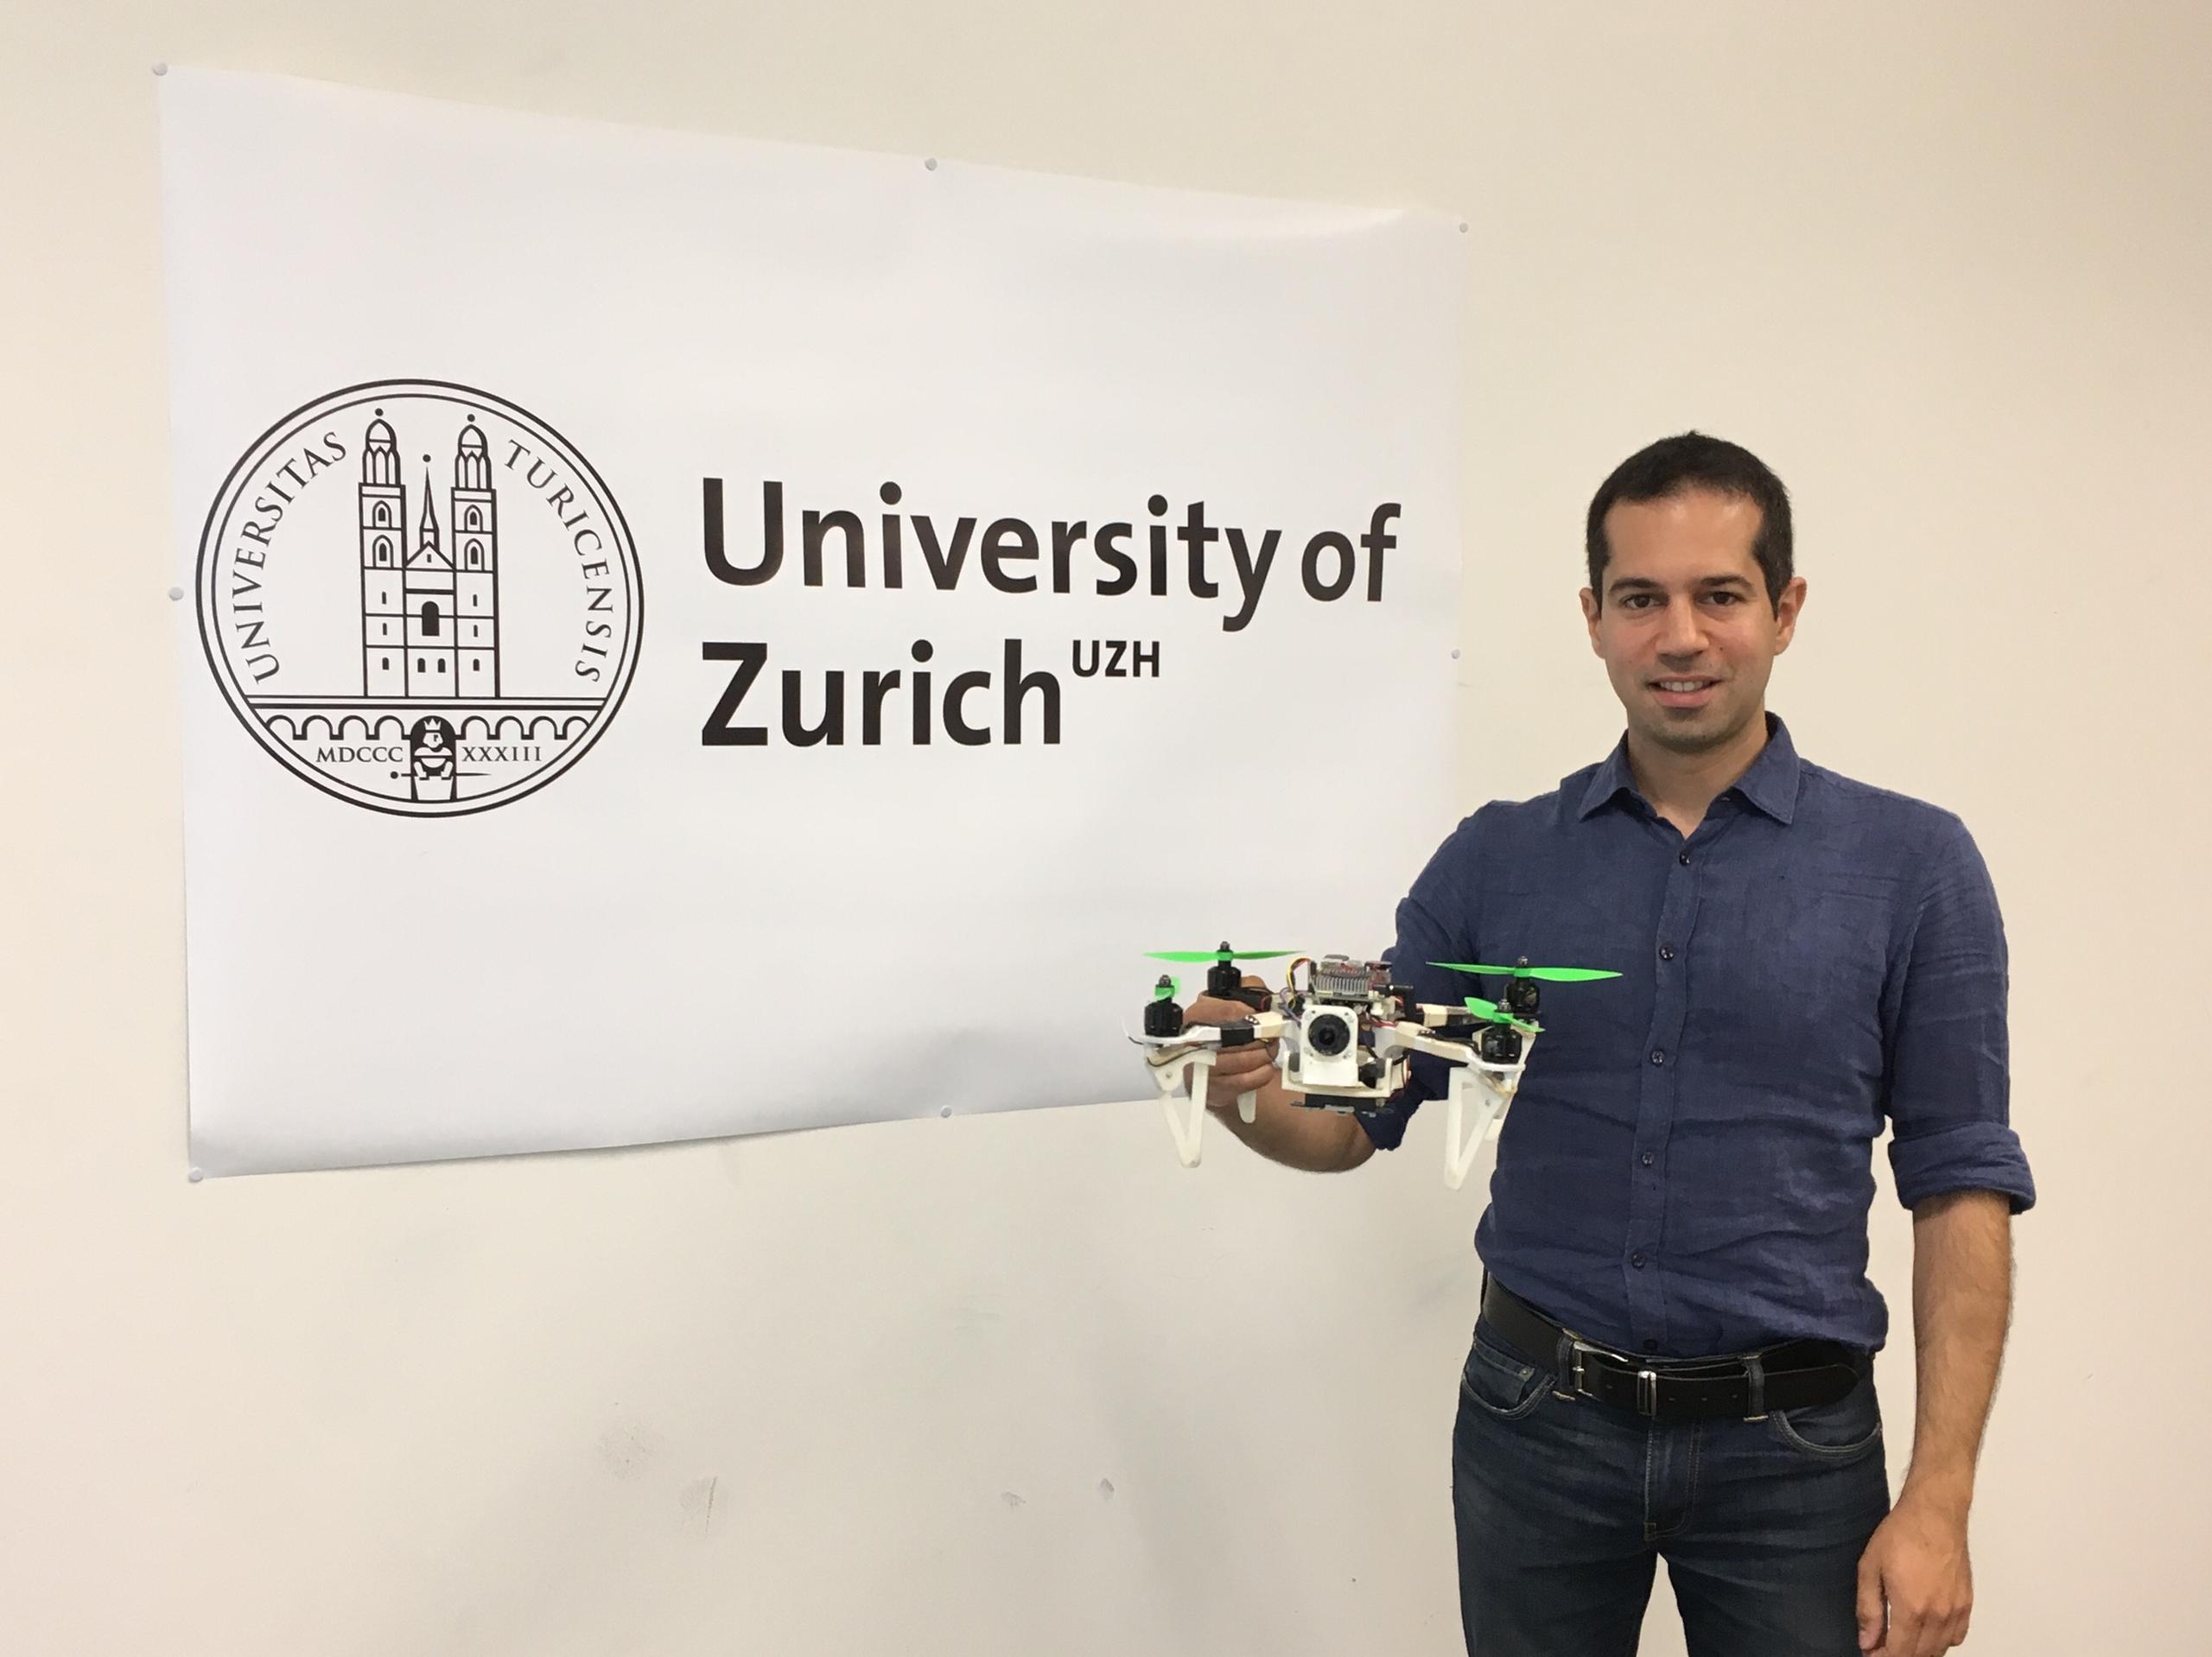 Davide Scaramuzza poses with one of his drone prototypes at the University of Zurich.